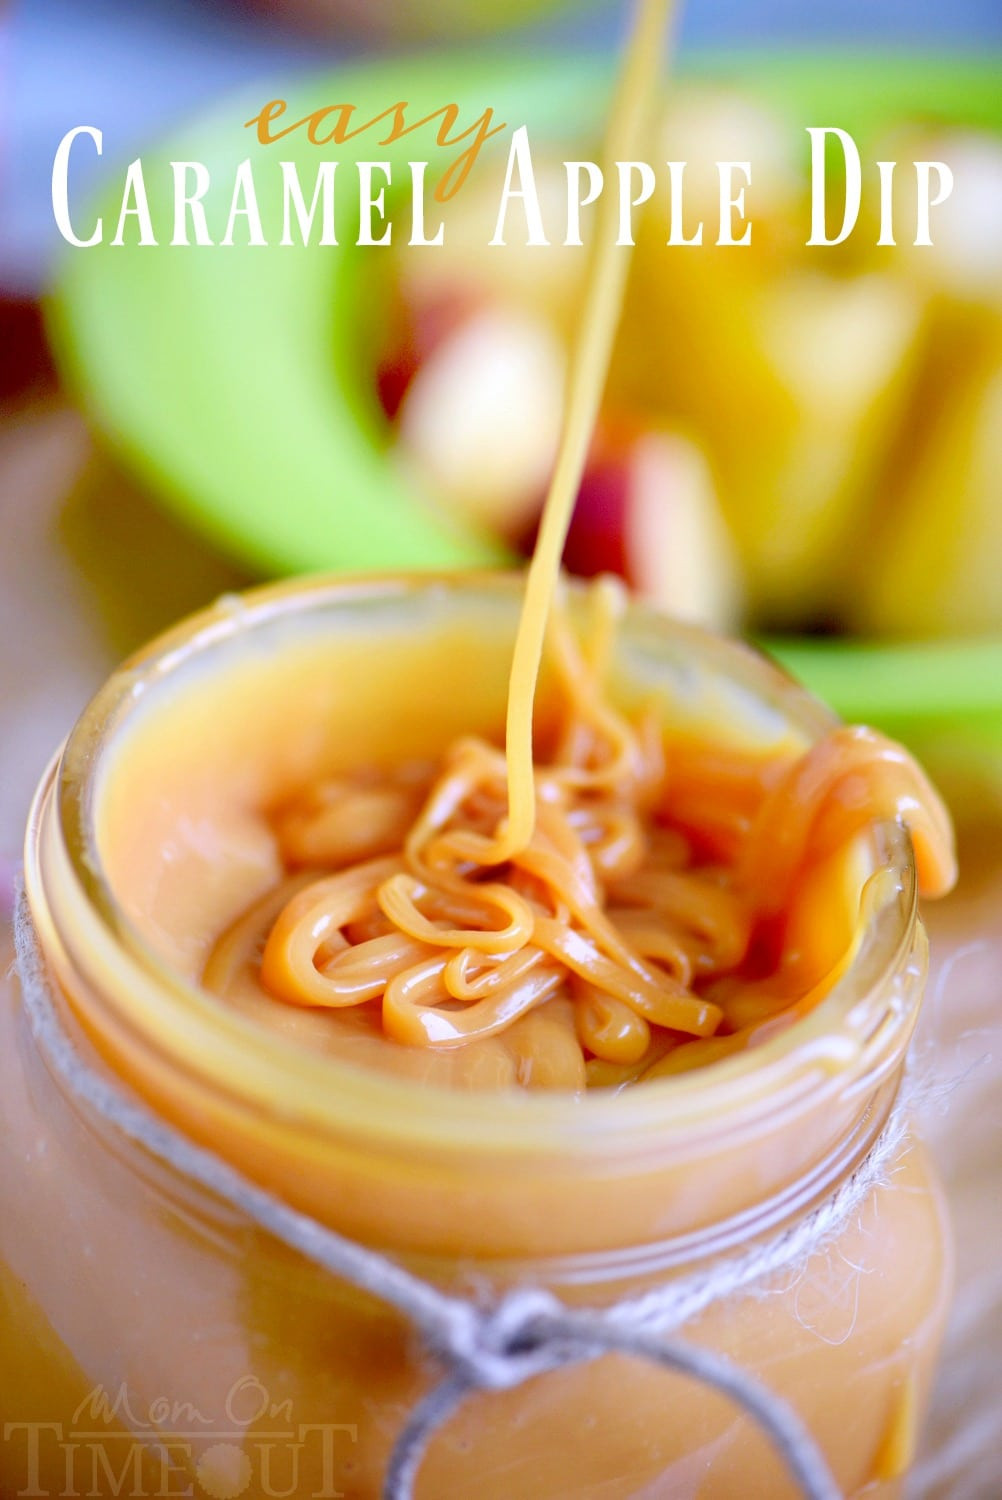 Caramel For Dipping Apples
 Easy Caramel Apple Dip Just 3 Ingre nts Mom Timeout